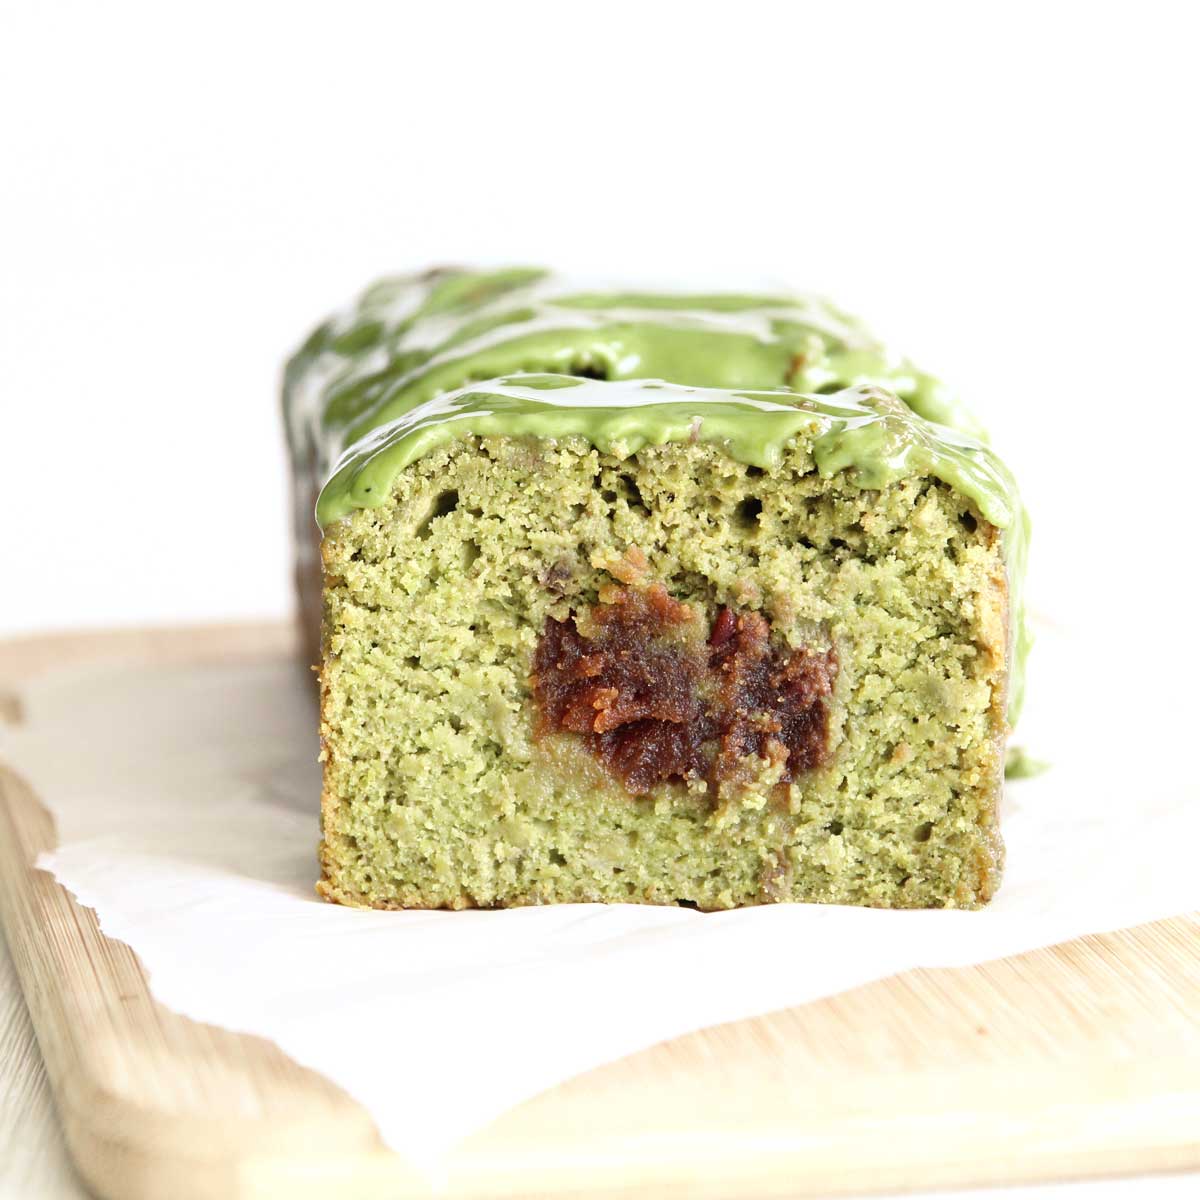 How to Make Matcha Banana Bread with Red Bean Paste Filling - Lemon Whipped Cream